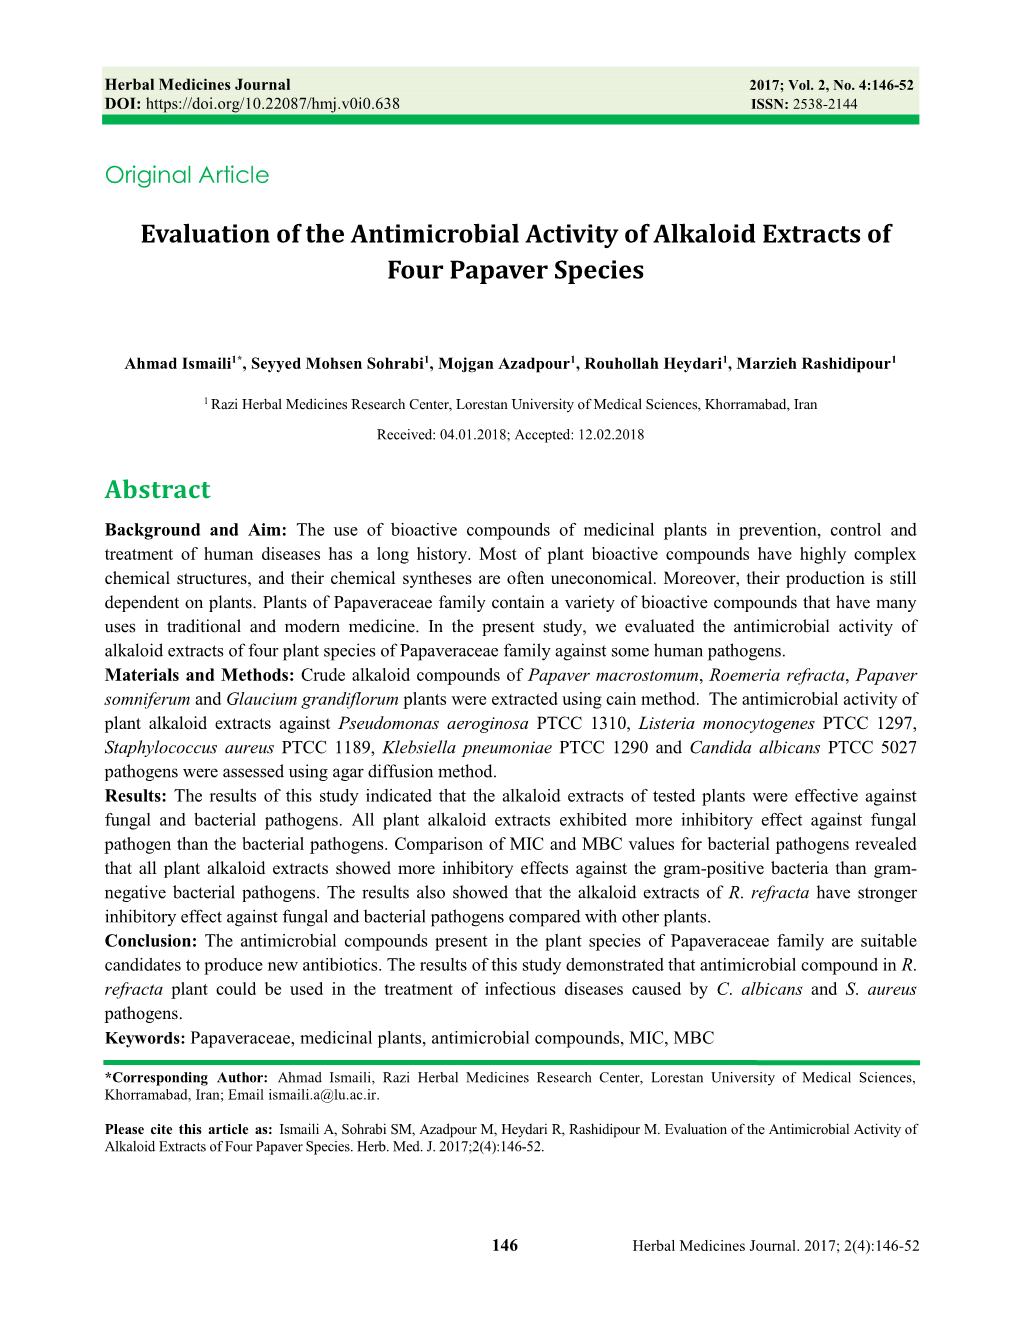 Evaluation of the Antimicrobial Activity of Alkaloid Extracts of Four Papaver Species